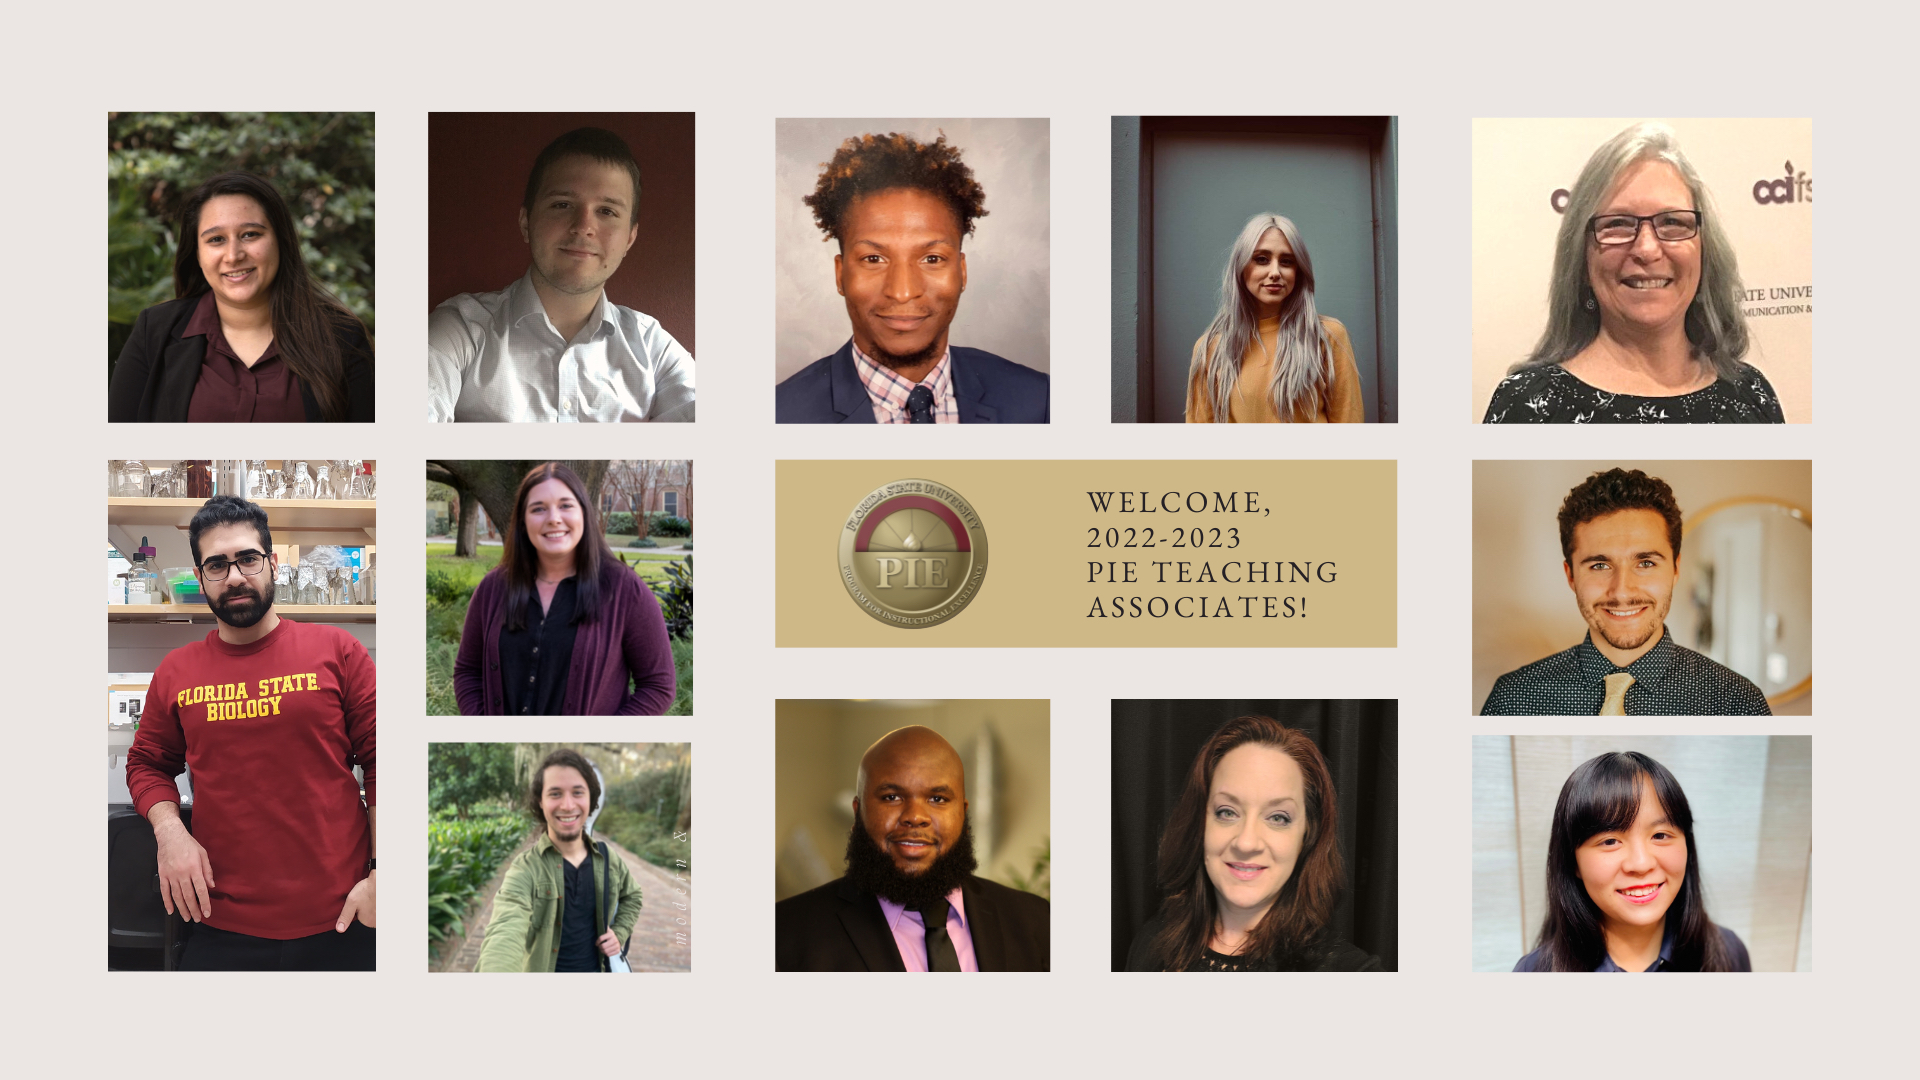 Collage of 12 headshots of the 2022-2023 PIE Teaching Associates; in the center, circular logo of the Program for Instructional Excellence and the phrase, "Welcome, 2022-2023 PIE Teaching Associates!"